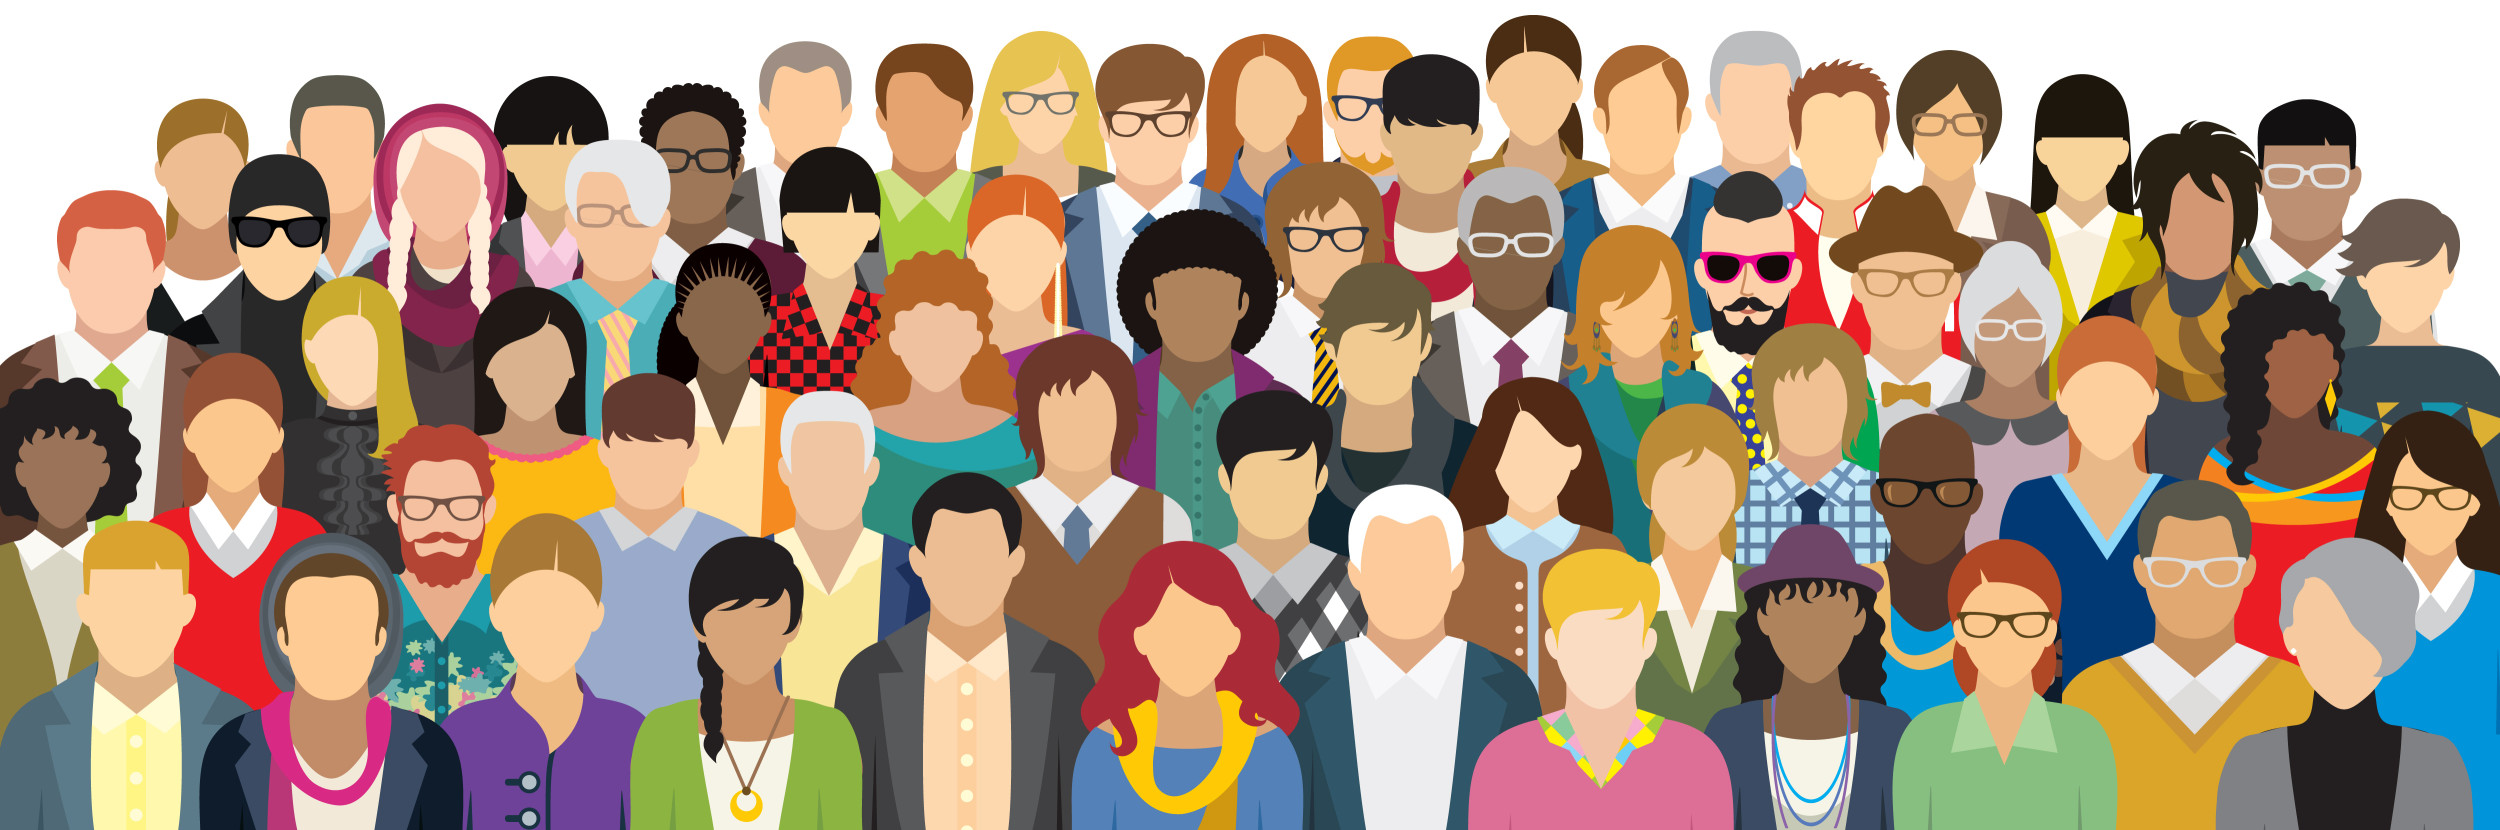 colorful illustration of diverse group of people